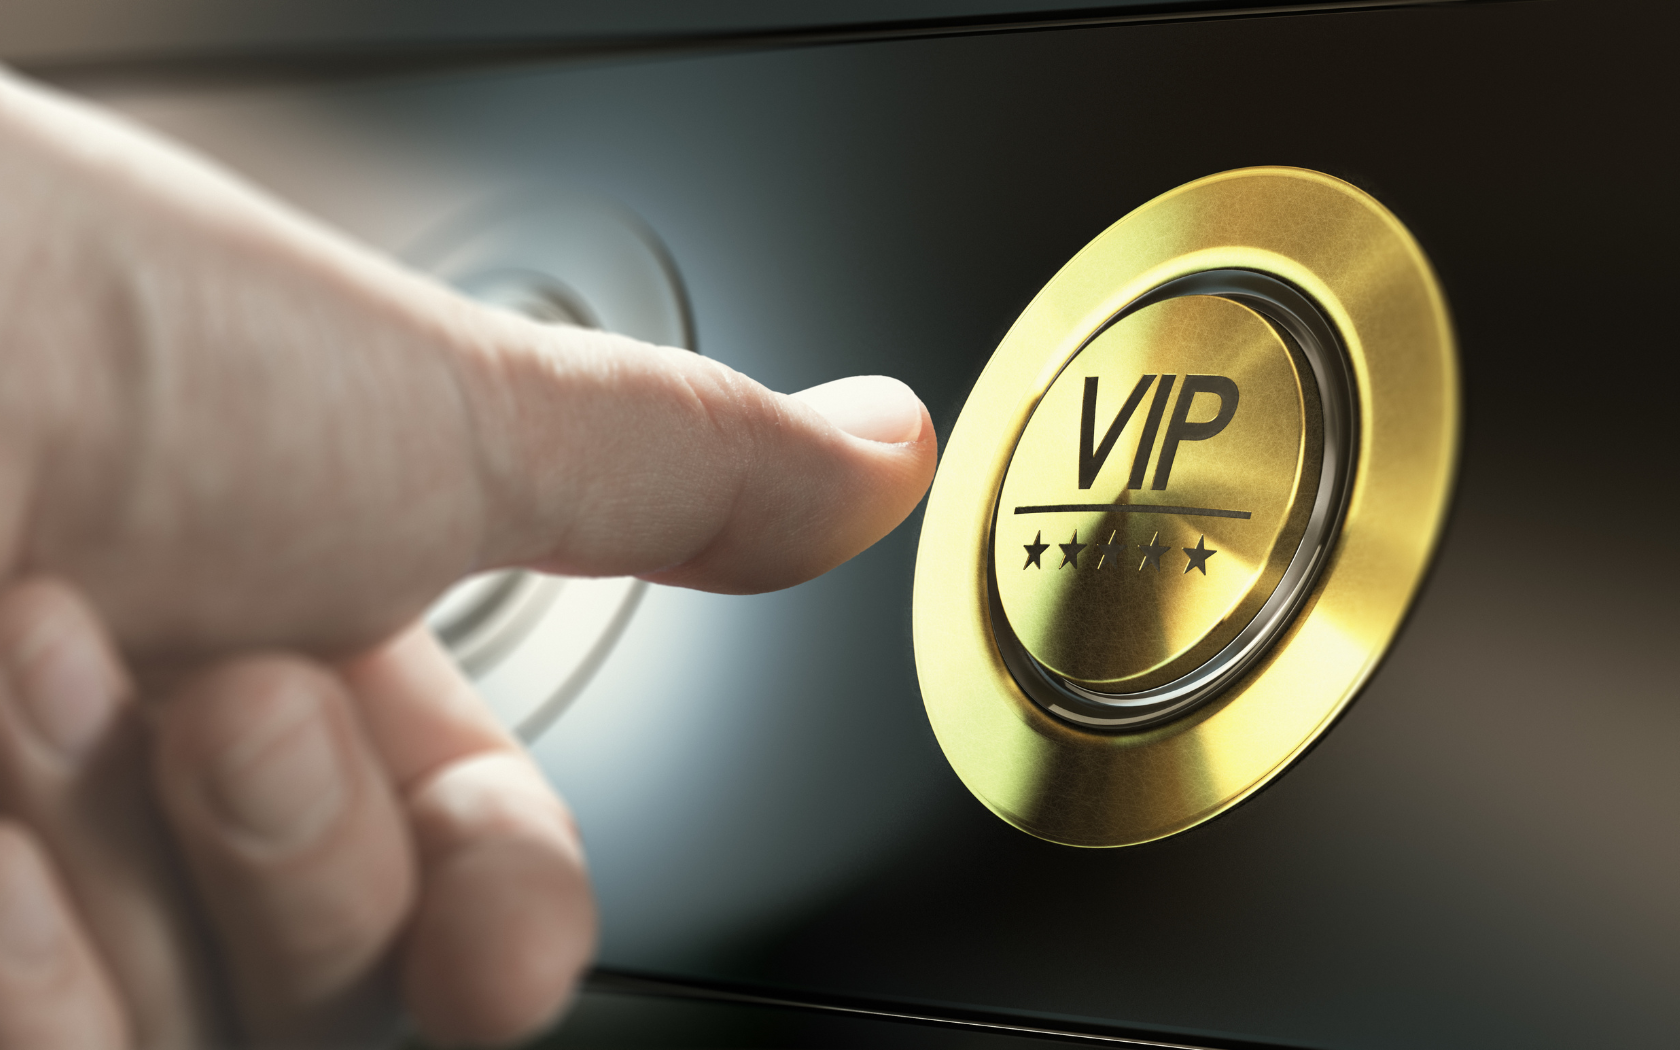 Get Started With Our Exclusive VIP Buyer Experience!